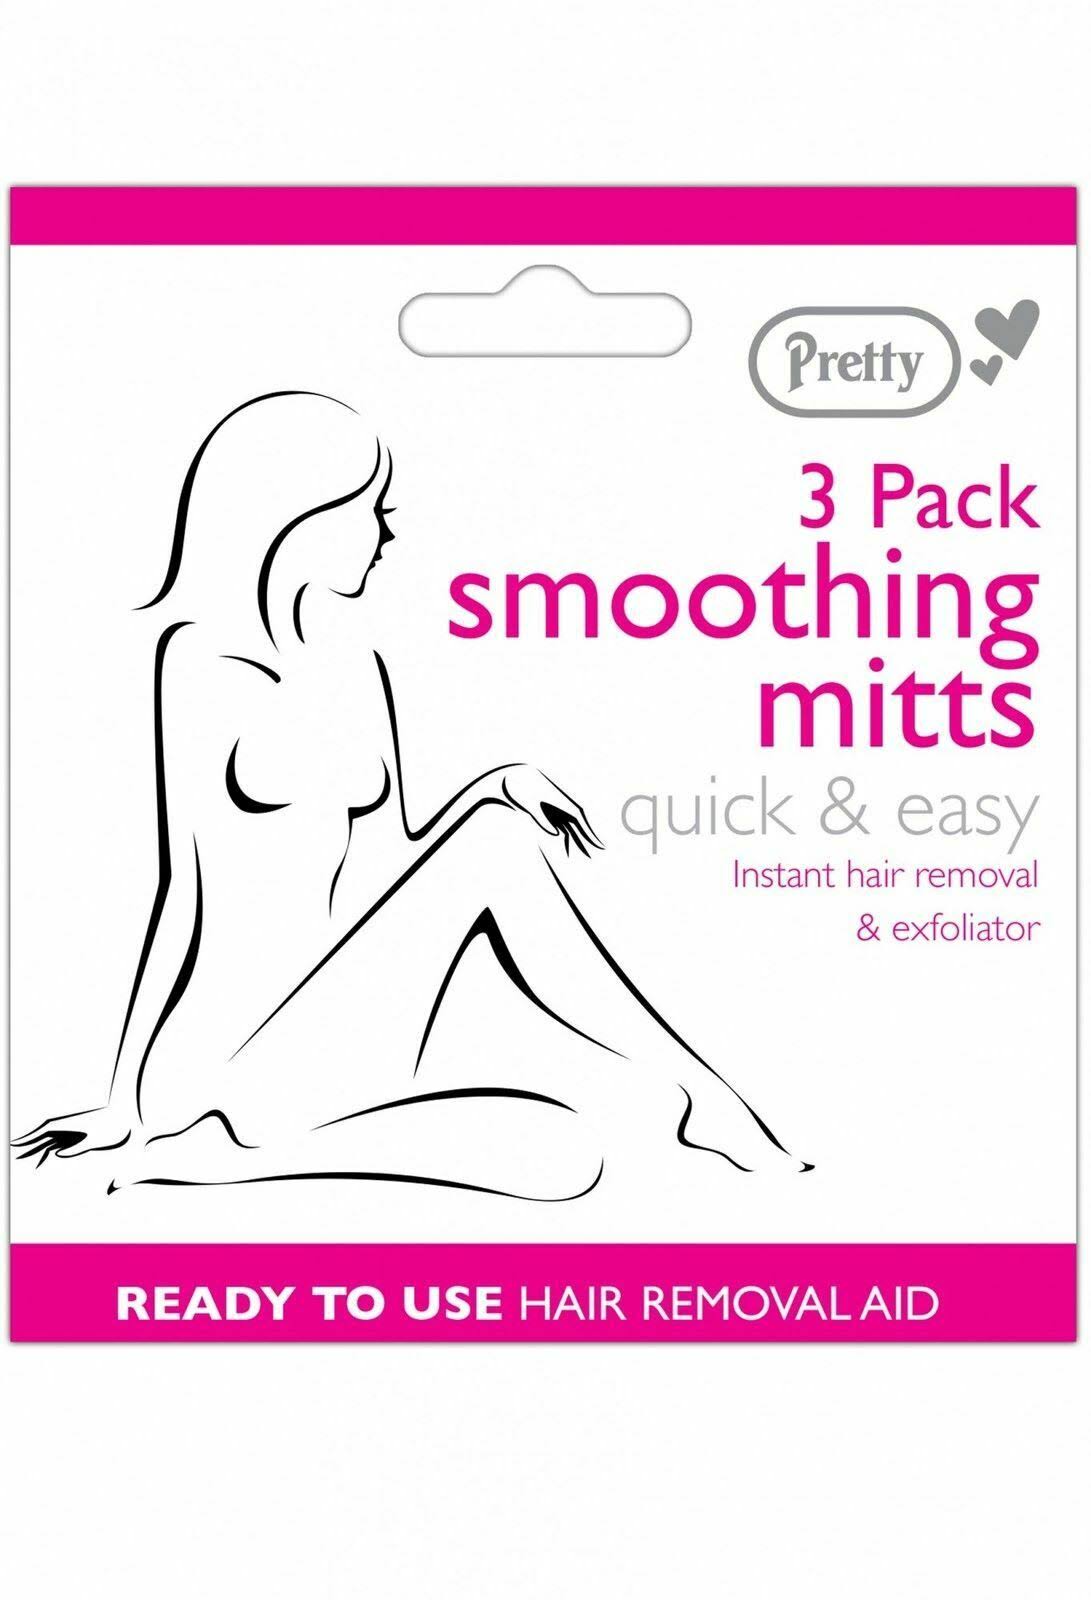 Pretty Smooth Exfoliating Smoothing Mitts - 3 Pack